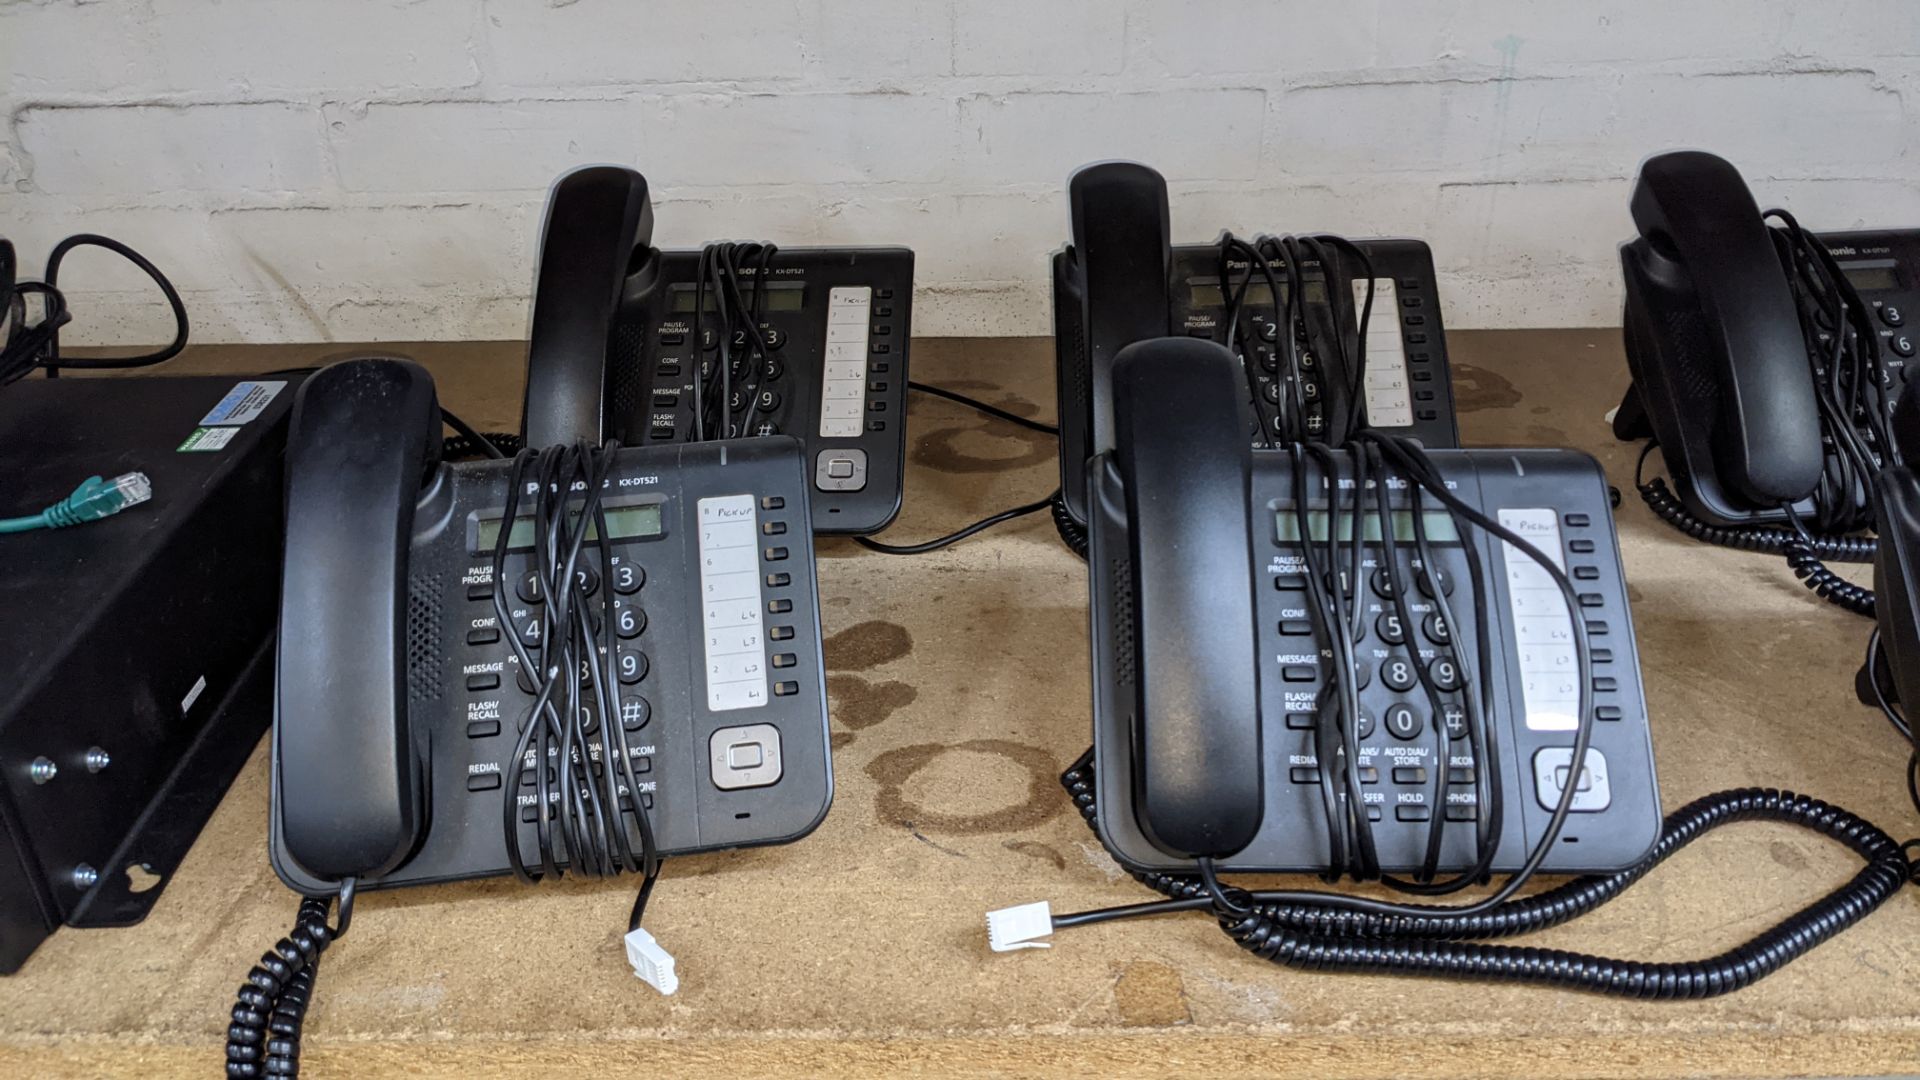 Panasonic phone system comprising KX-NS700 phone system plus 6 handsets - Image 9 of 12